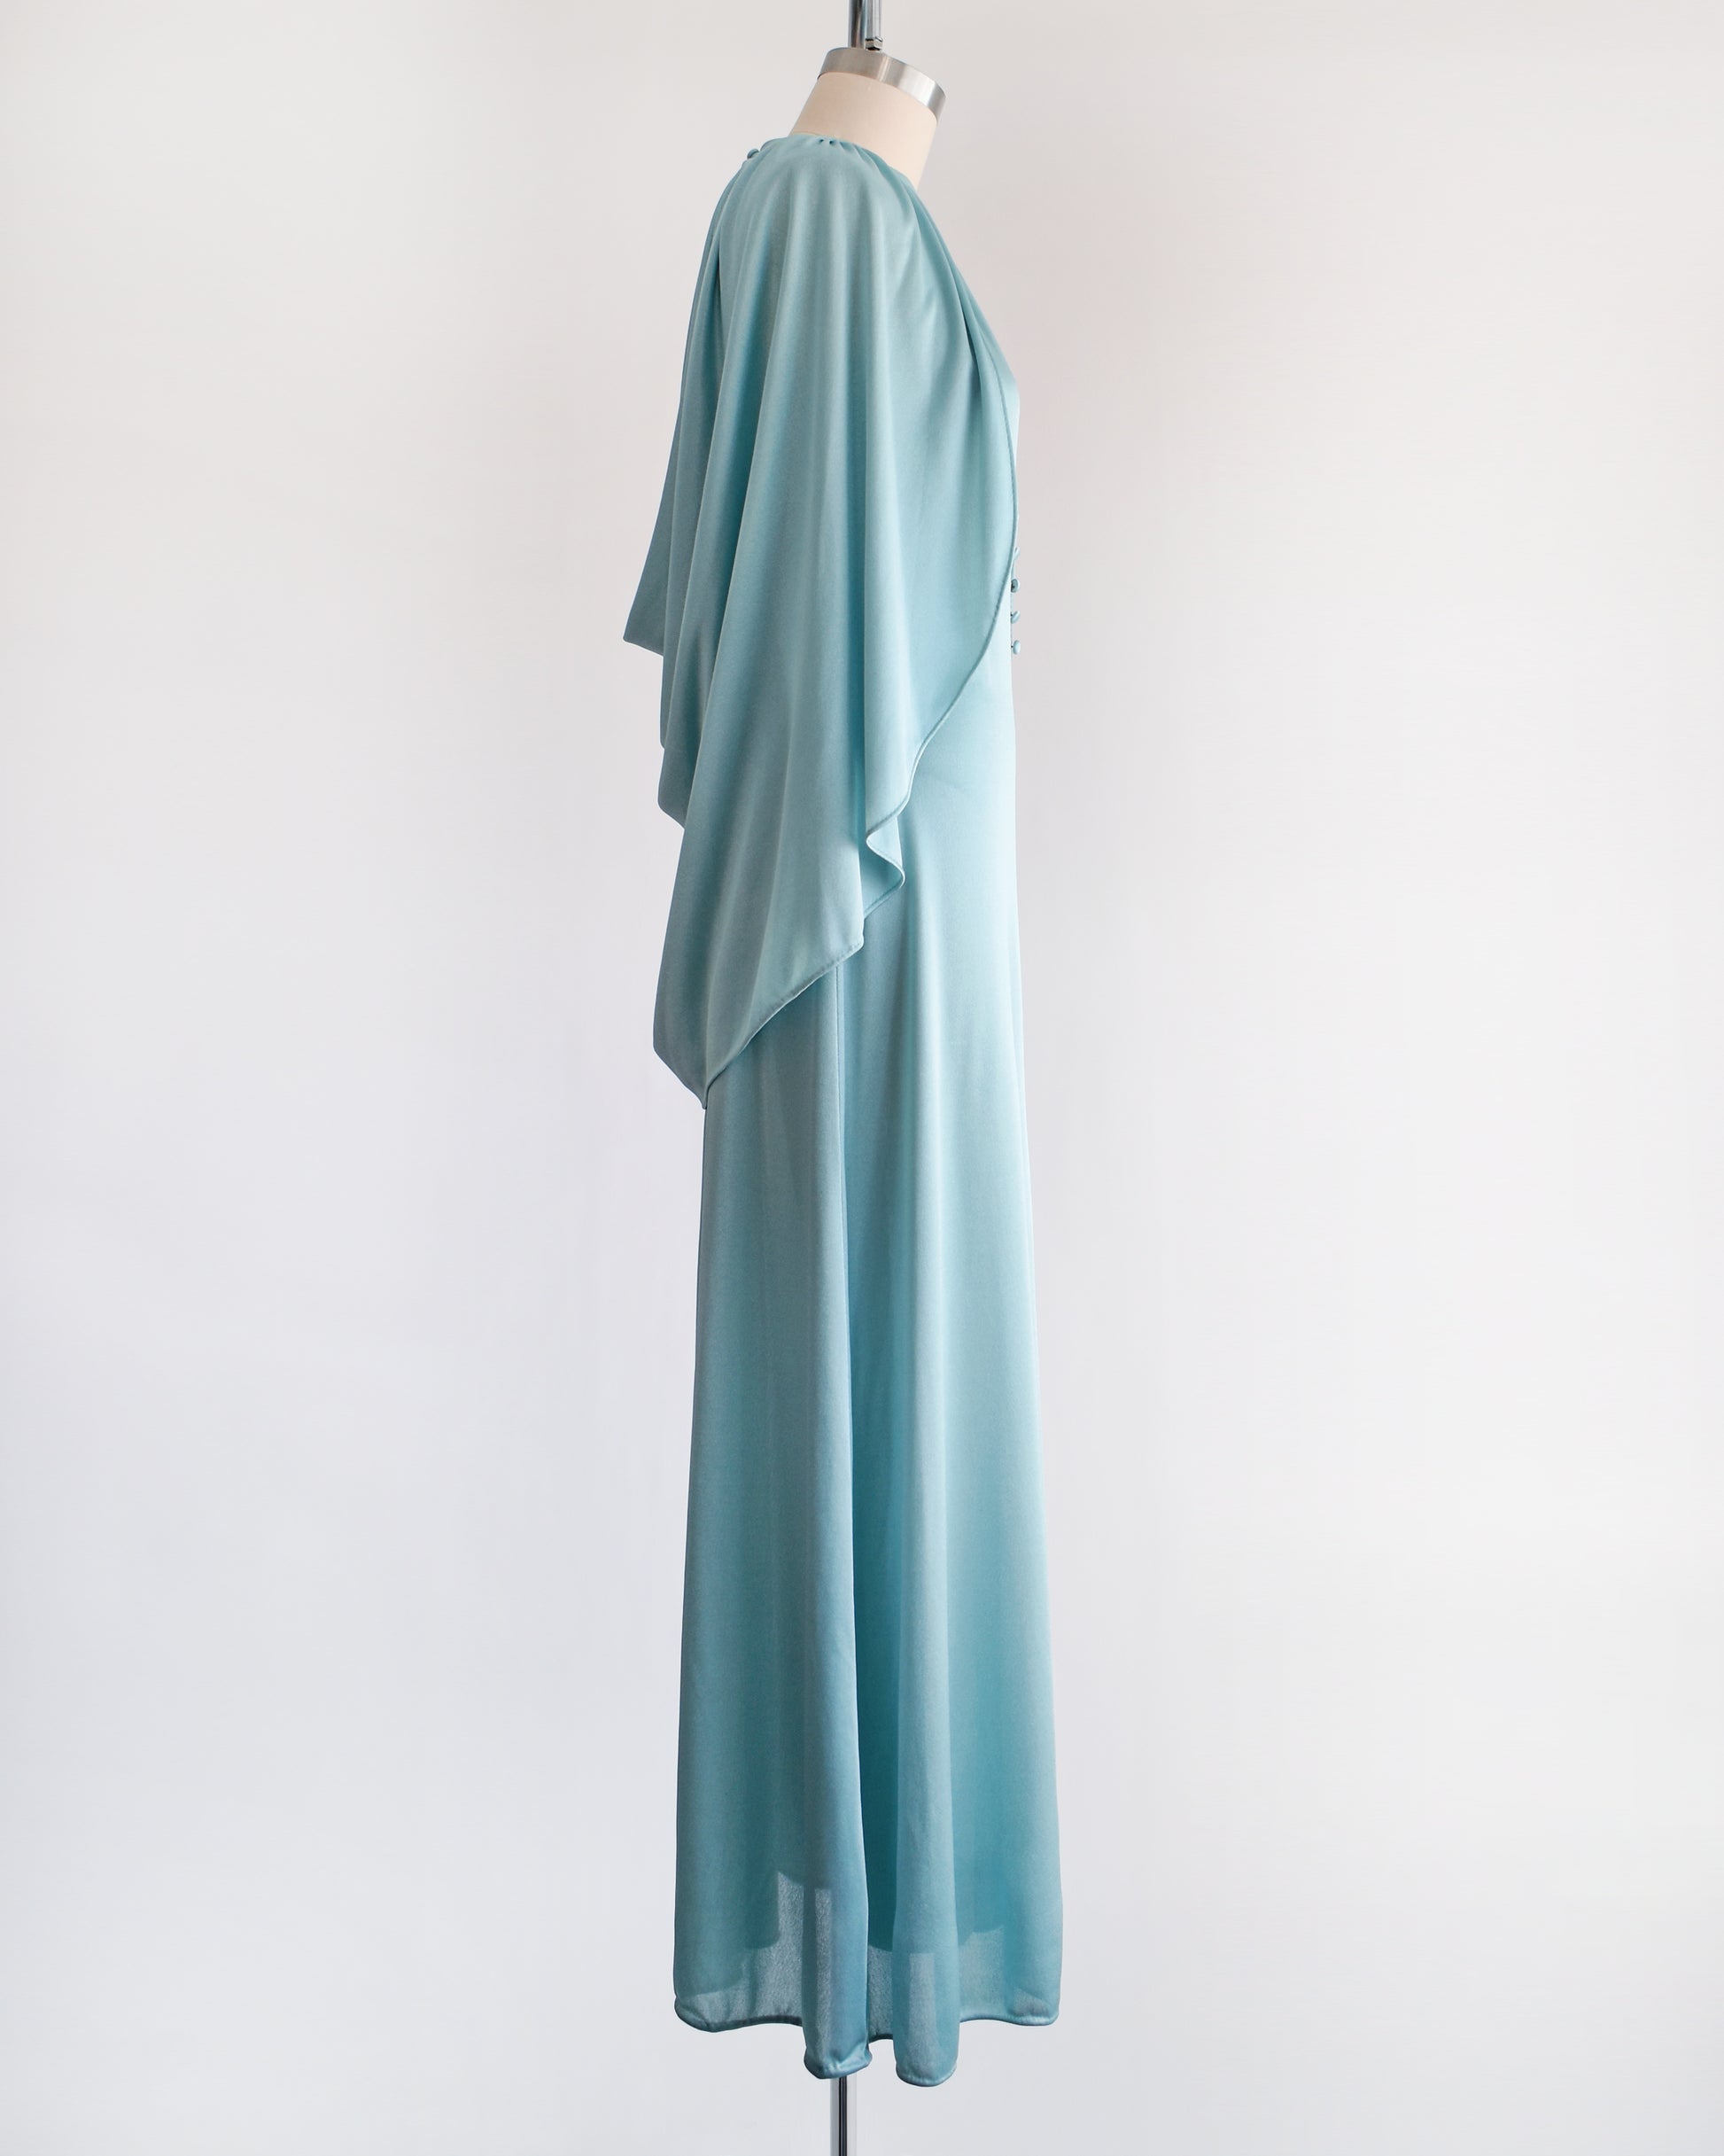 Side front view of a vintage 1970s seafoam blue caped maxi dress that has a triangle keyhole cutout and decorative buttons down the front